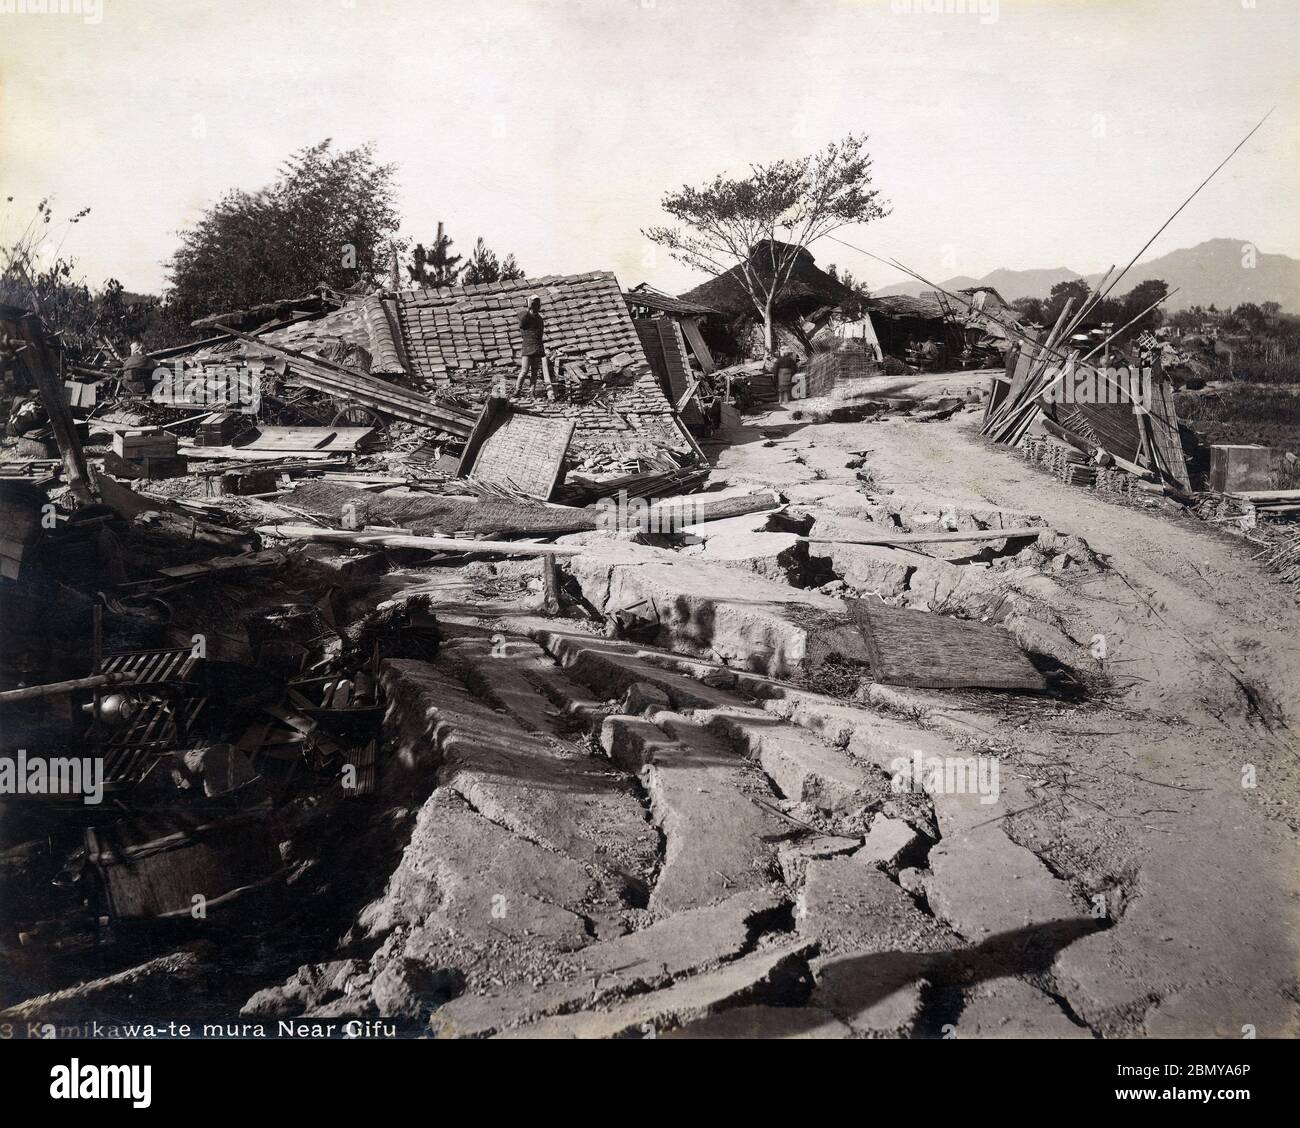 [ 1890s Japan - Nobi Earthquake ] —   A road with homes devastated by the Nobi Earthquake (濃尾地震, Nobi Jishin) of October 28, 1891 (Meiji 24).  The Nobi Earthquake measured between 8.0 and 8.4 on the scale of Richter and caused 7,273 deaths, 17,175 casualties and the destruction of 142,177 homes.  The caption identifies the location as Kamikawate-mura (上川手村) near Gifu. This area is now part of Gifu City).  19th century vintage albumen photograph. Stock Photo